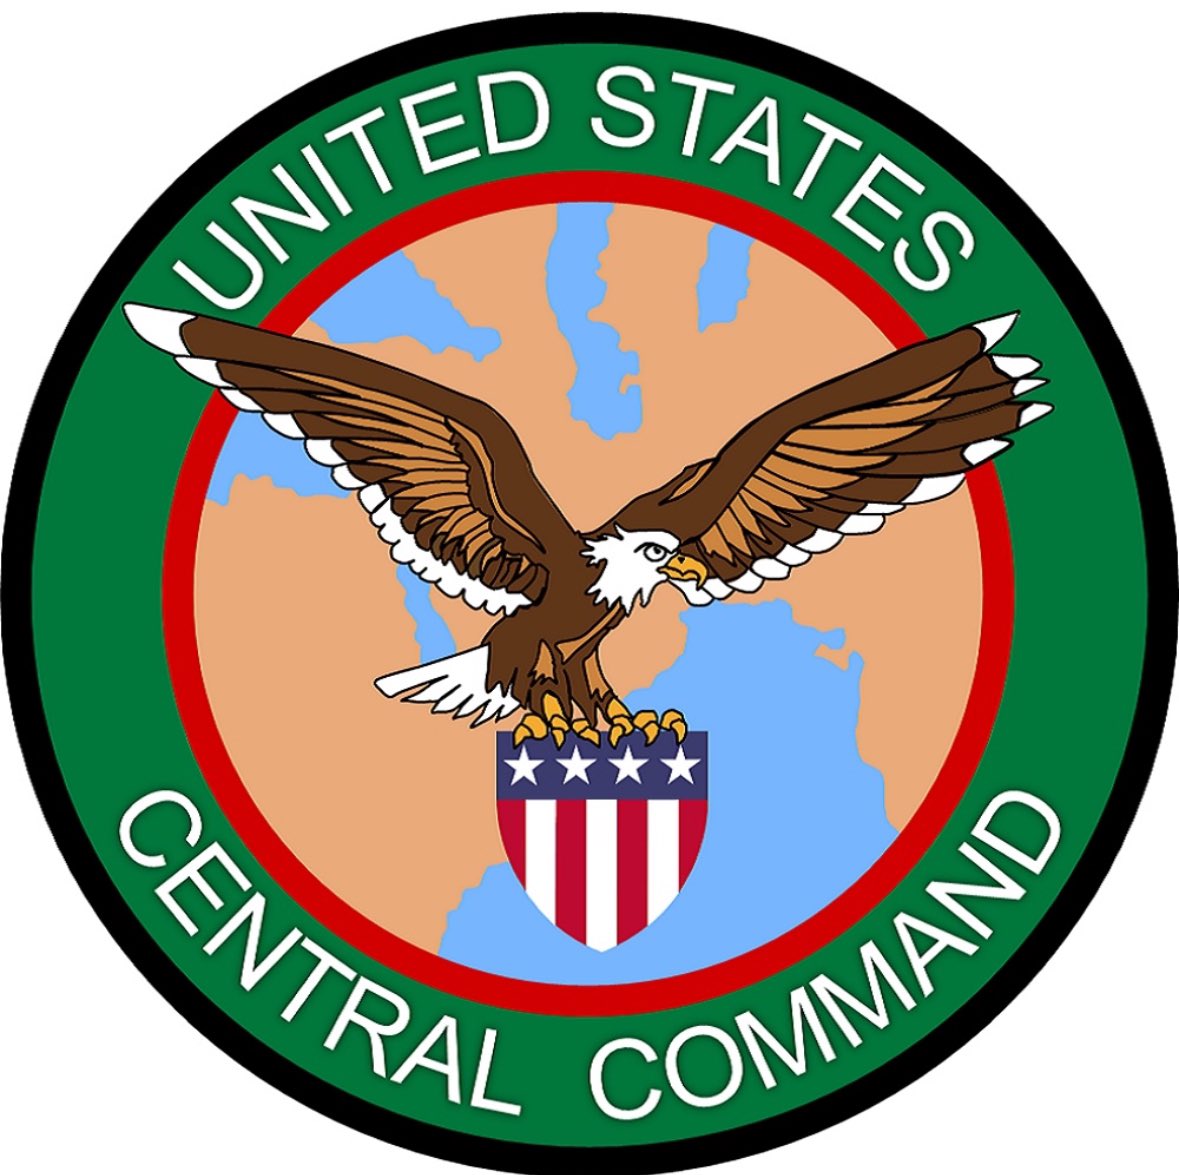 May 13 Red Sea Update     At approximately 3:41 p.m. (Sanaa time) on May 13, U.S. Central Command (USCENTCOM) forces successfully destroyed one uncrewed aerial system (UAS) in an Iranian-backed Houthi controlled area of Yemen.     Later, between approximately 5:51 p.m. and 6:02…